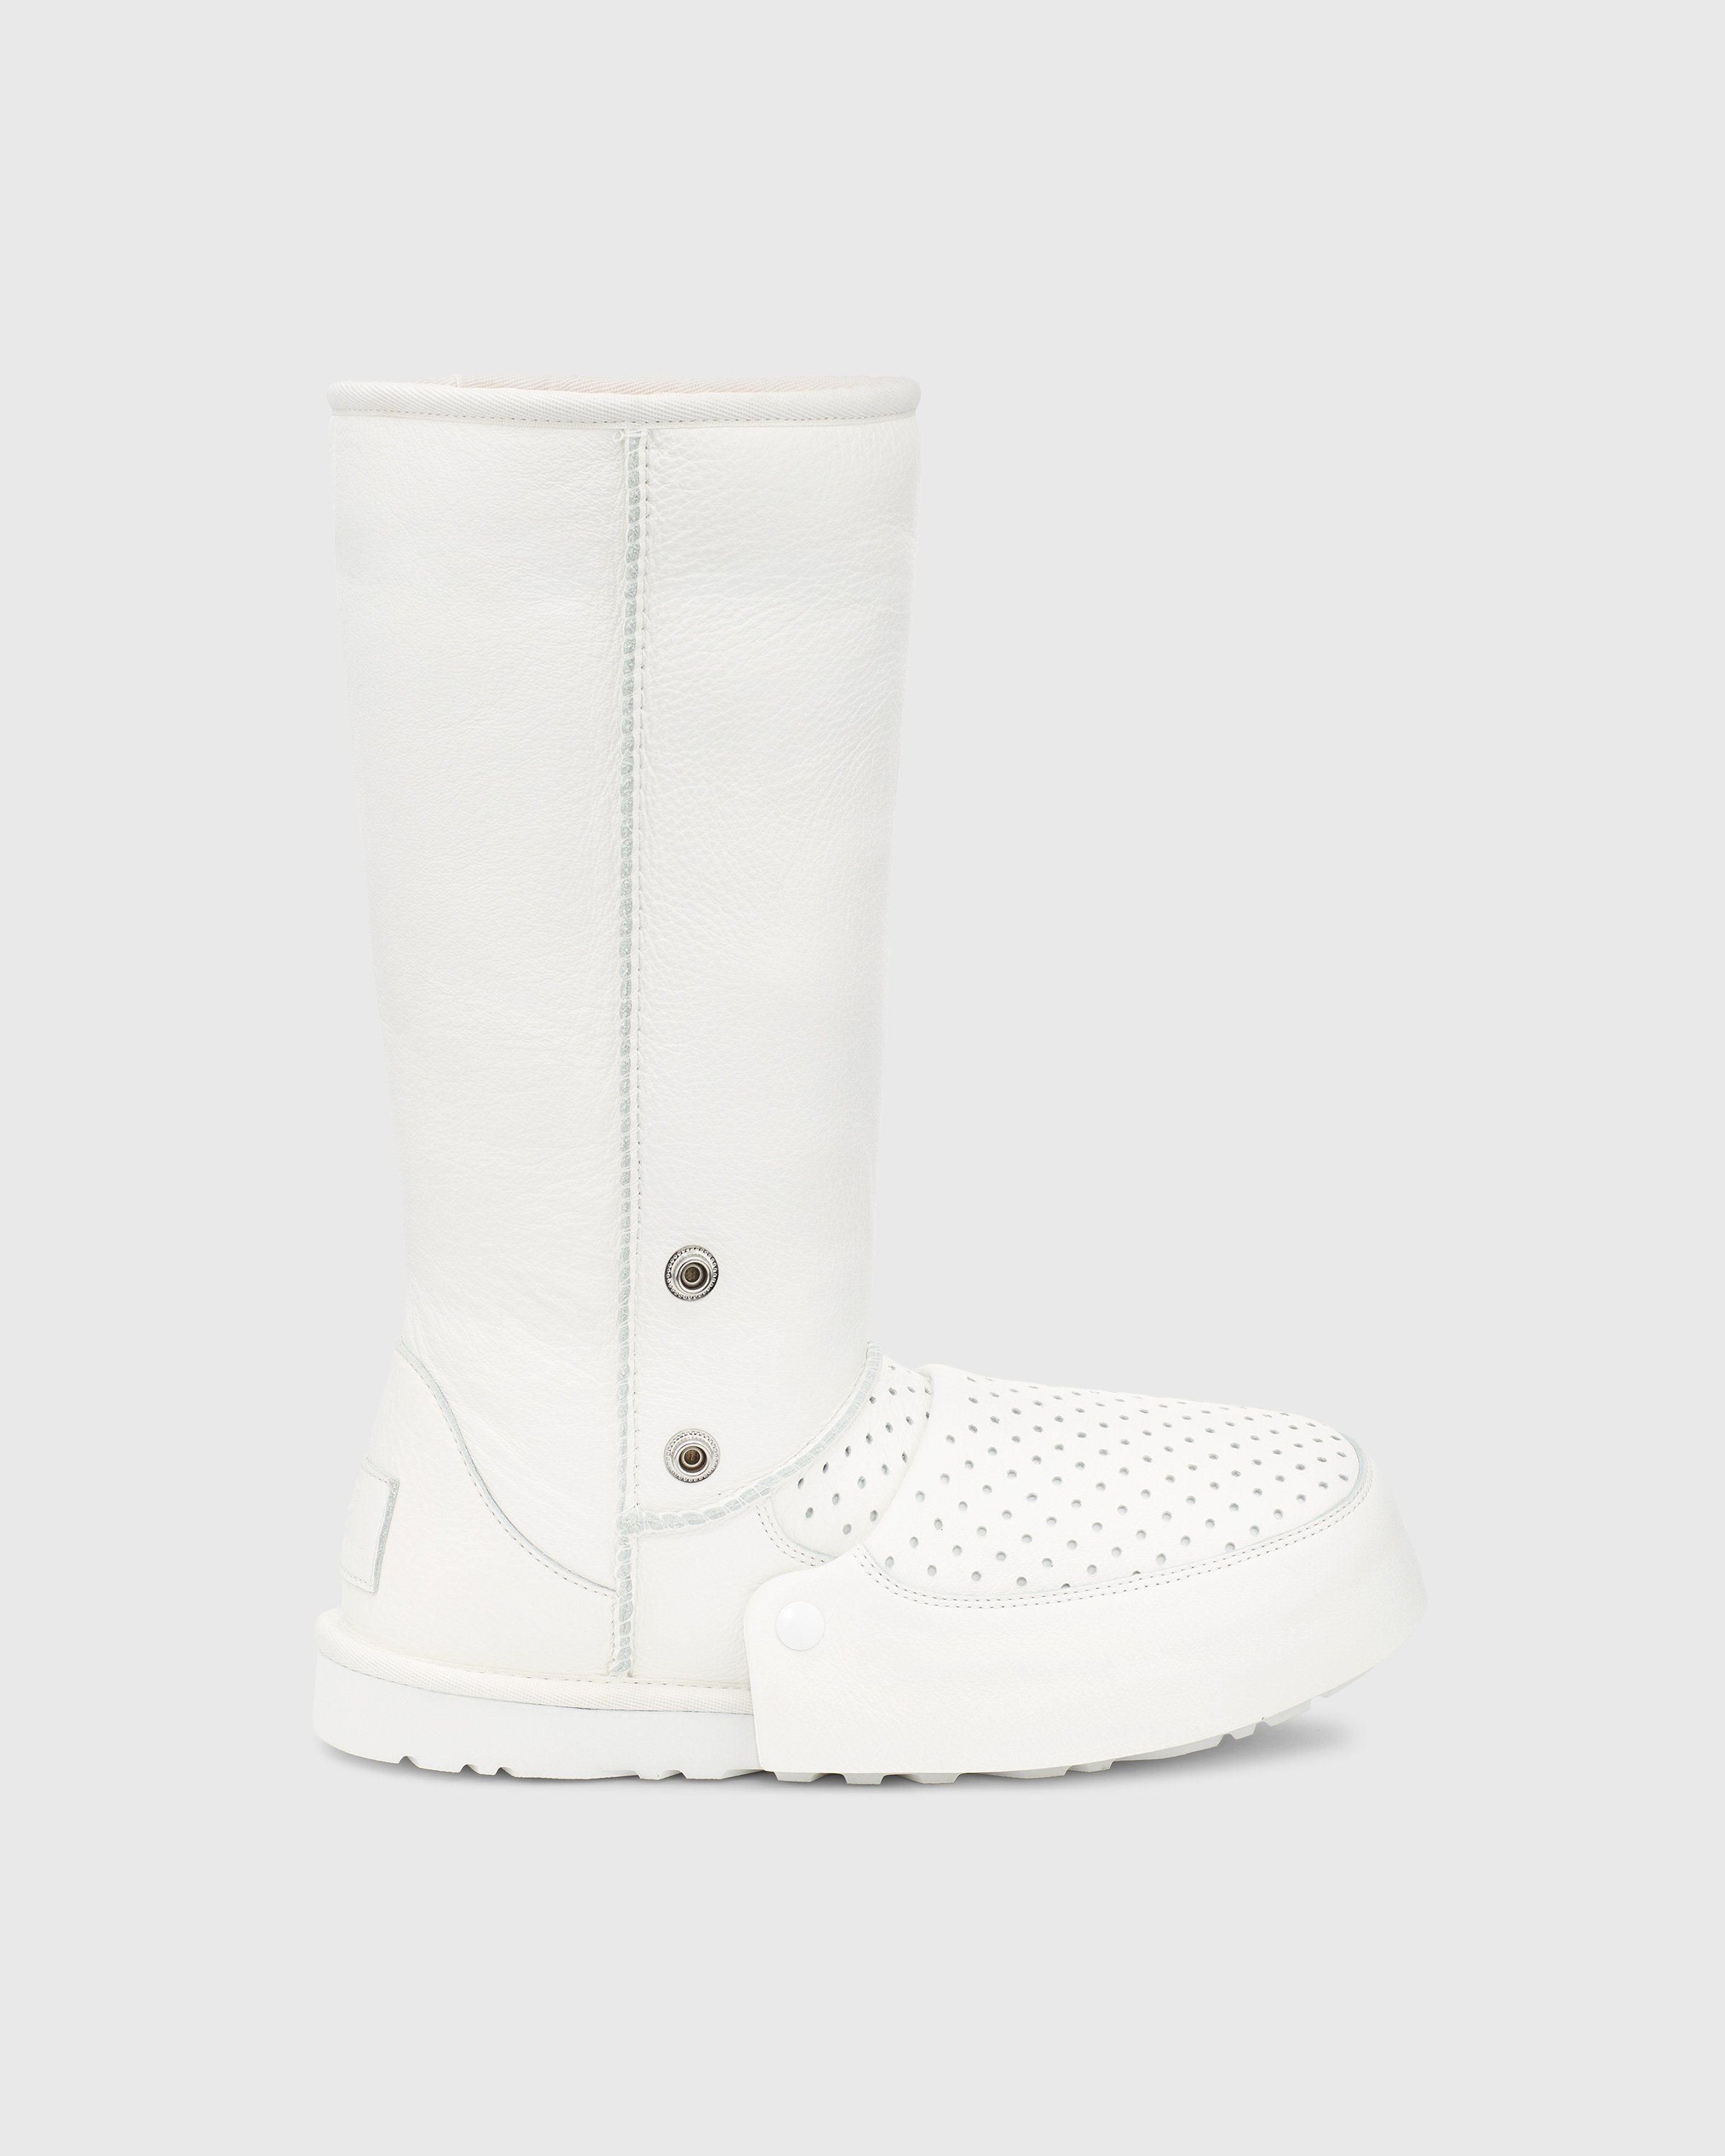 Ugg x Shayne Oliver - Tall Boot White - Footwear - White - Image 6